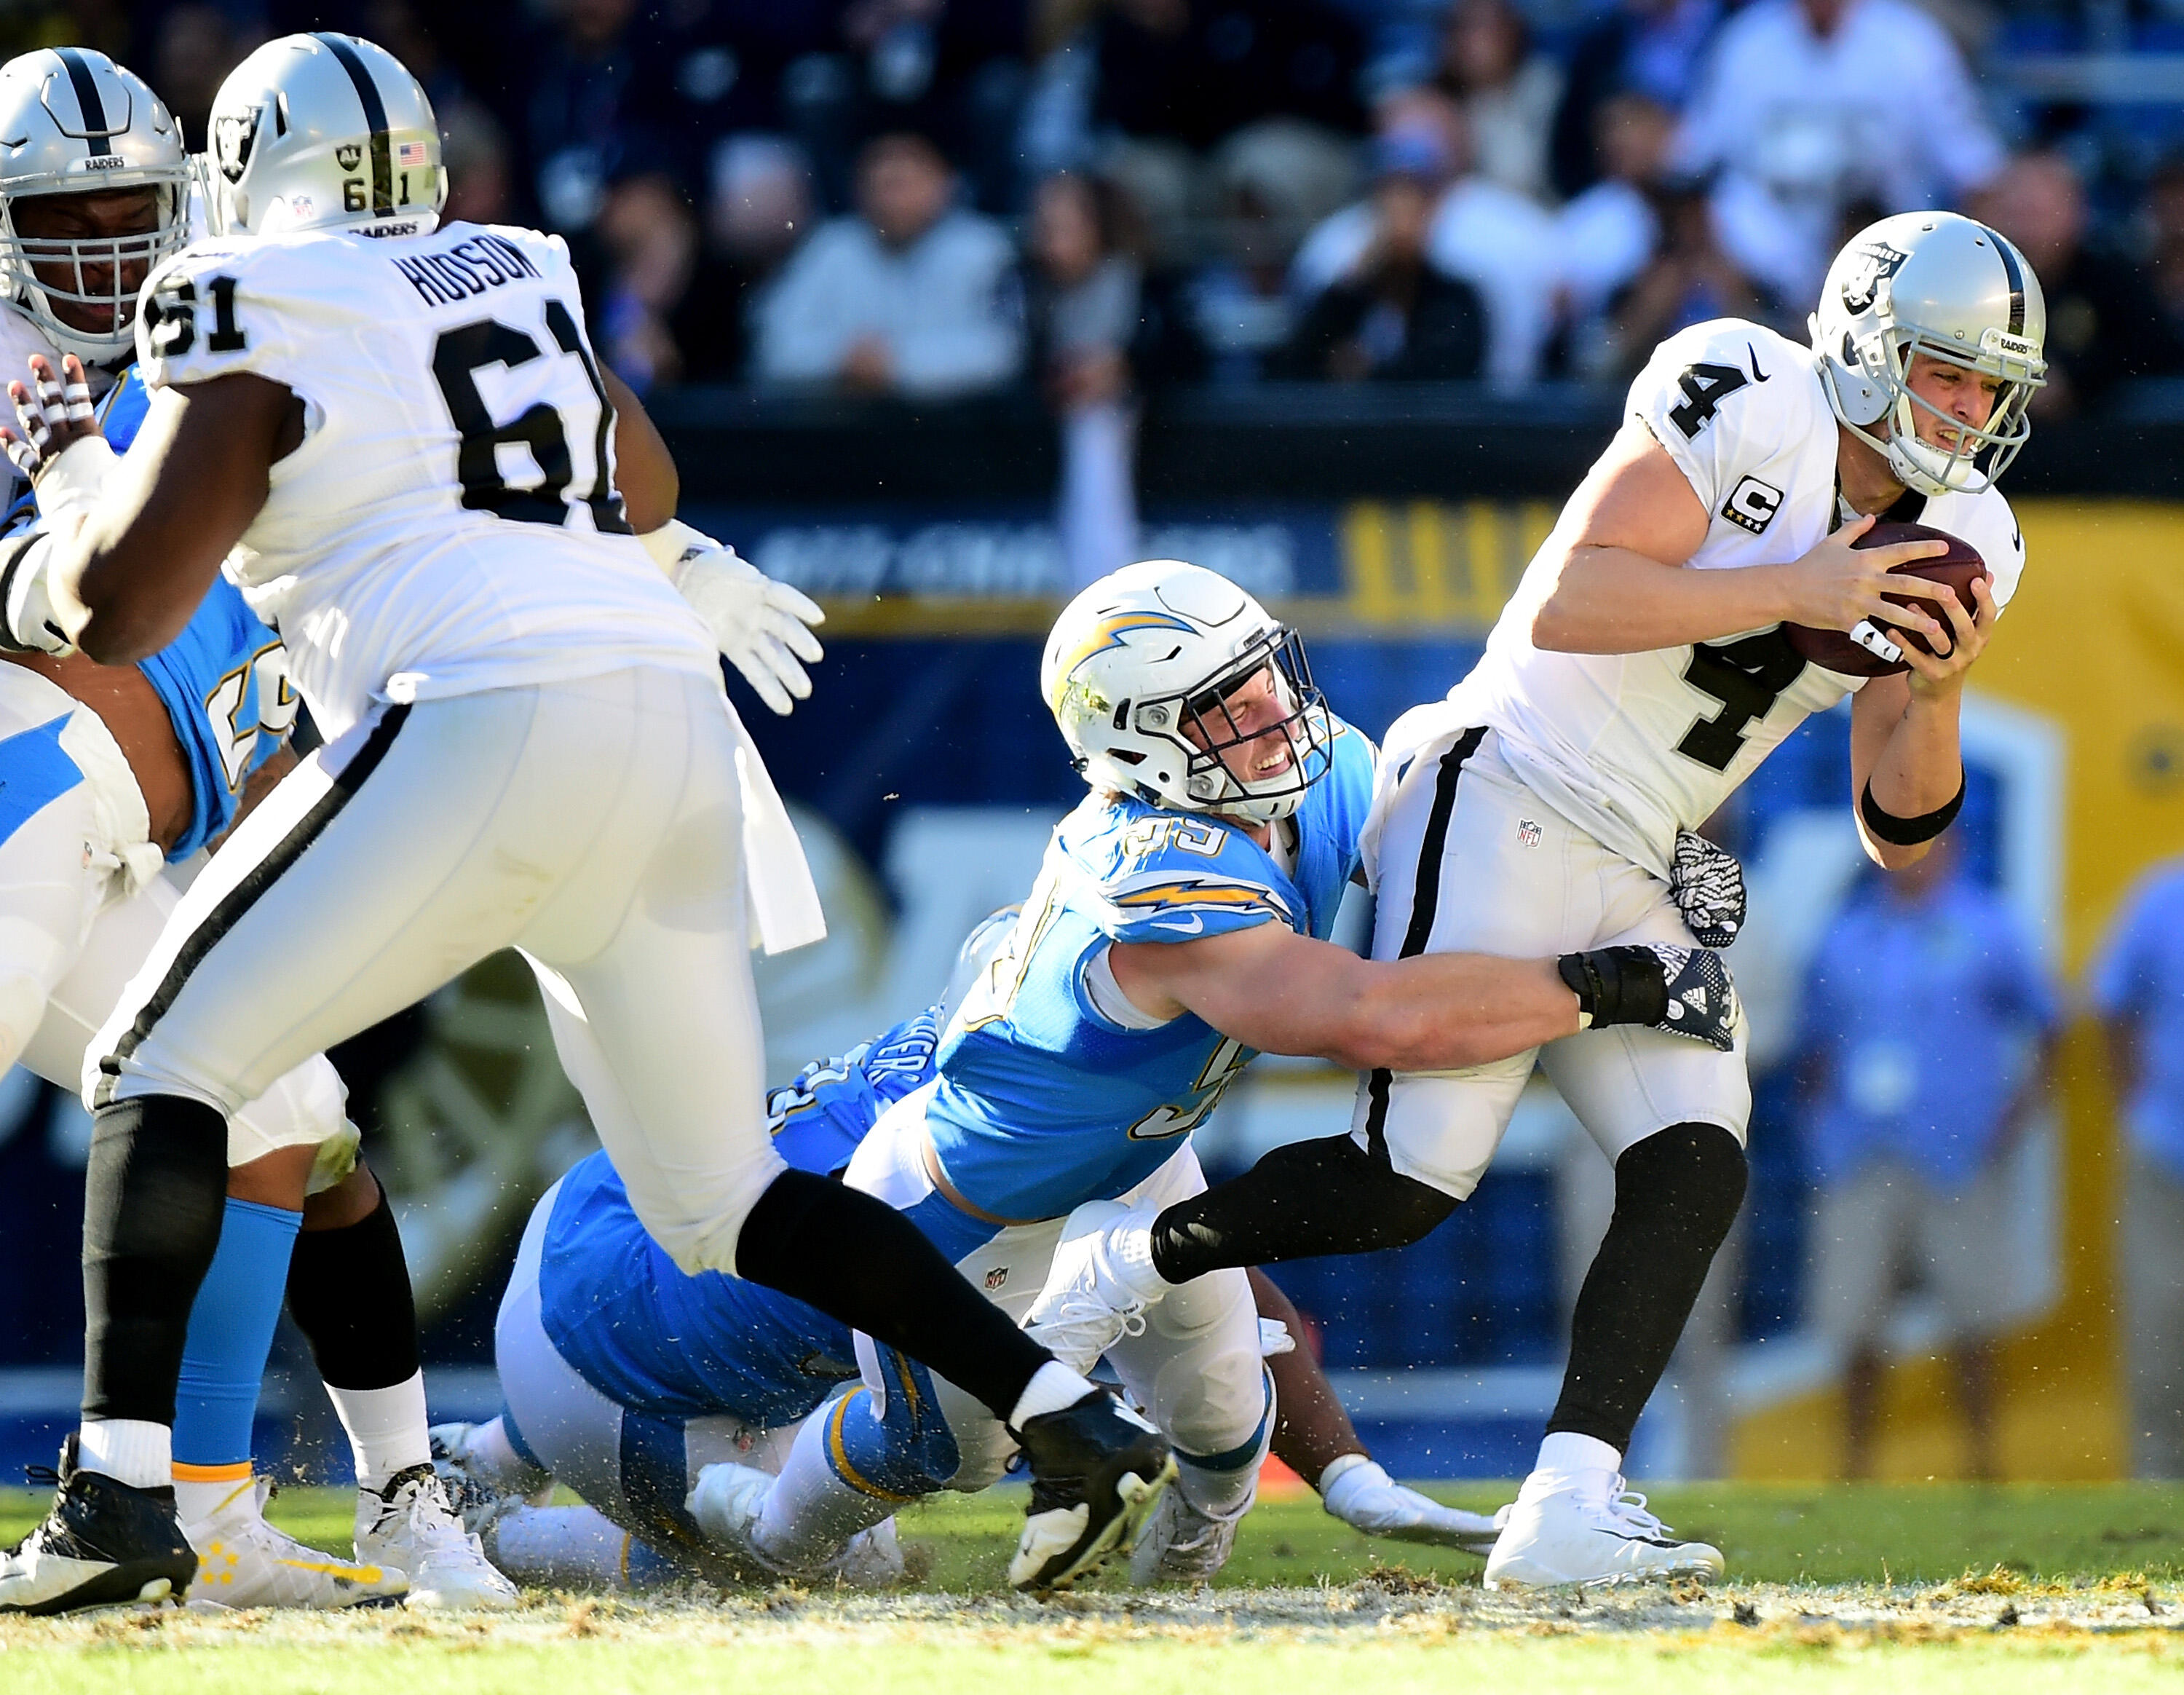 SAN DIEGO, CA - DECEMBER 18:  Derek Carr #4 of the Oakland Raiders is sacked for a six yard loss by Joey Bosa #99 of the San Diego Chargers during the second quarter at Qualcomm Stadium on December 18, 2016 in San Diego, California.  (Photo by Harry How/G